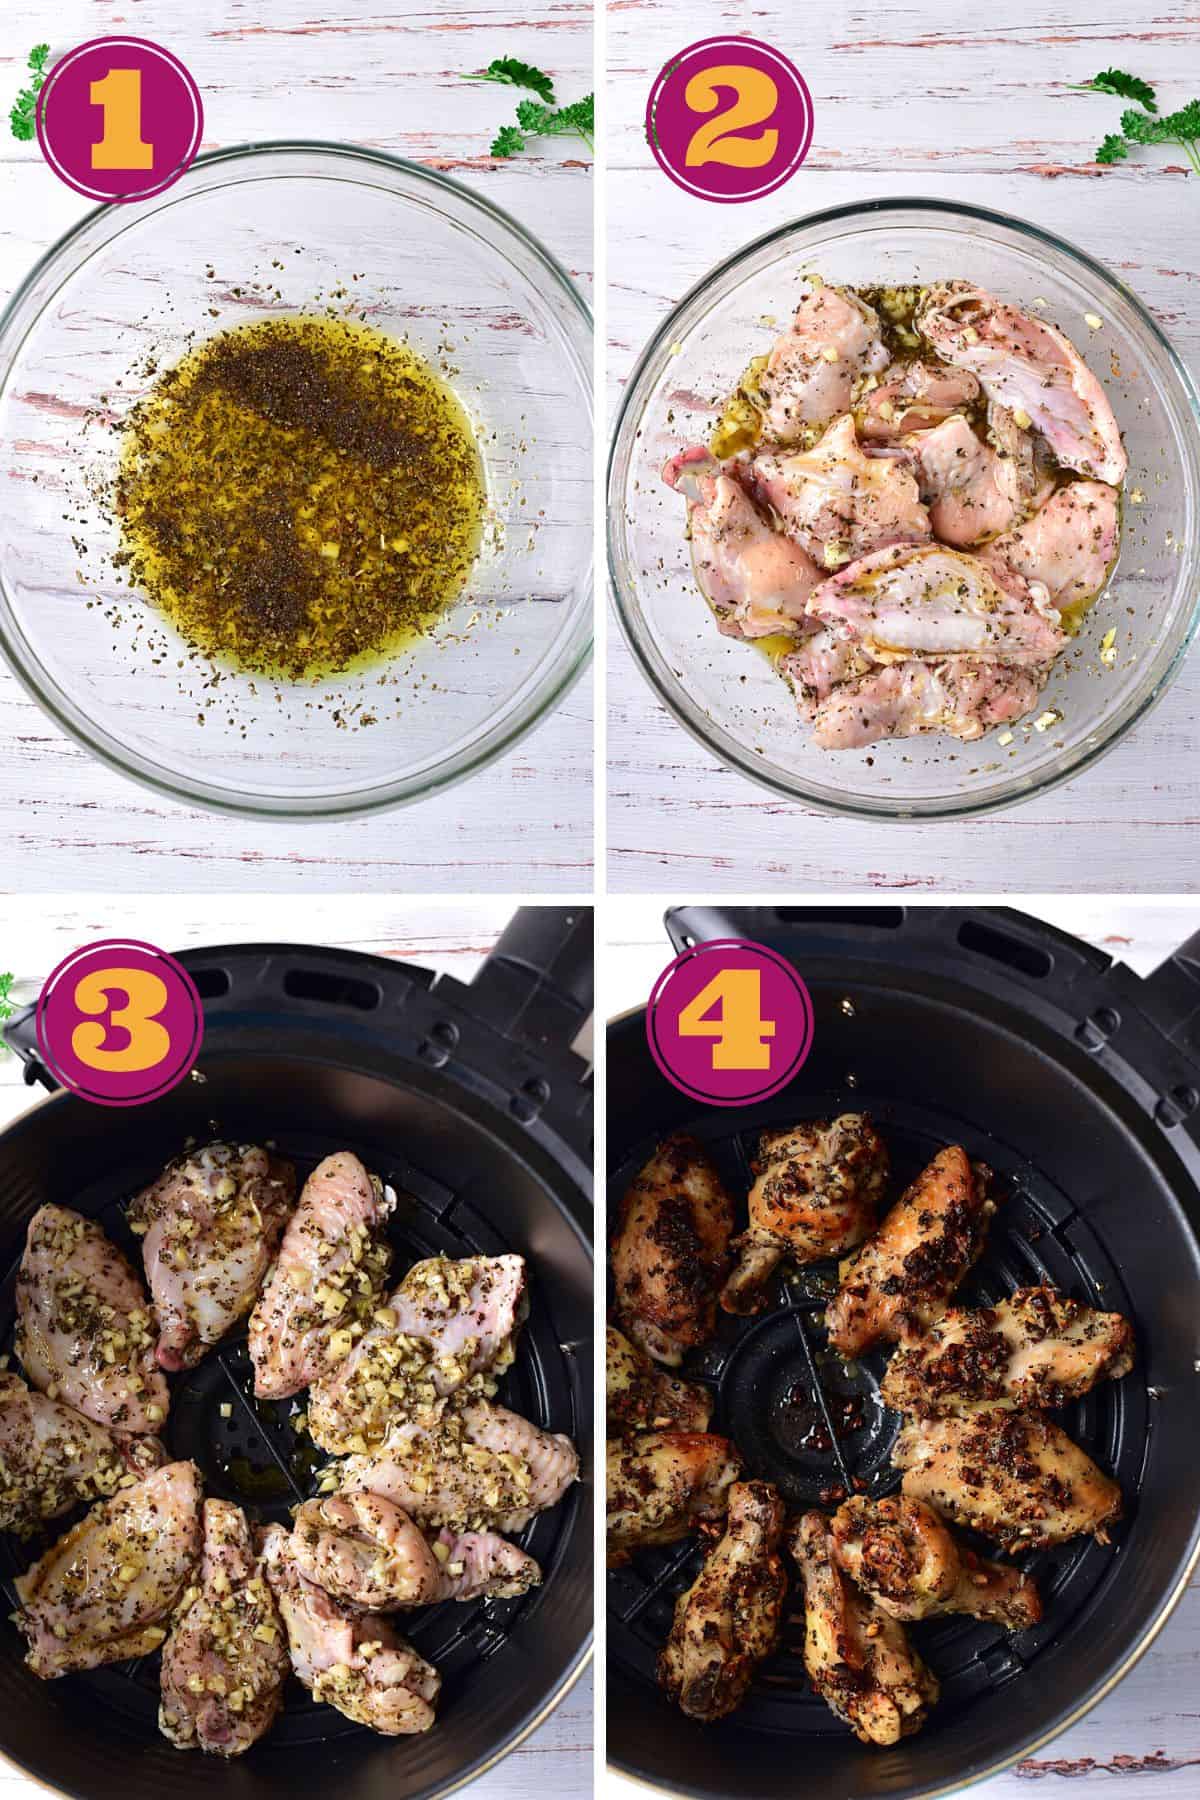 step-by-step instructions for how to cook marinated chicken wings in an air fryer with a homemade chicken wing marinade